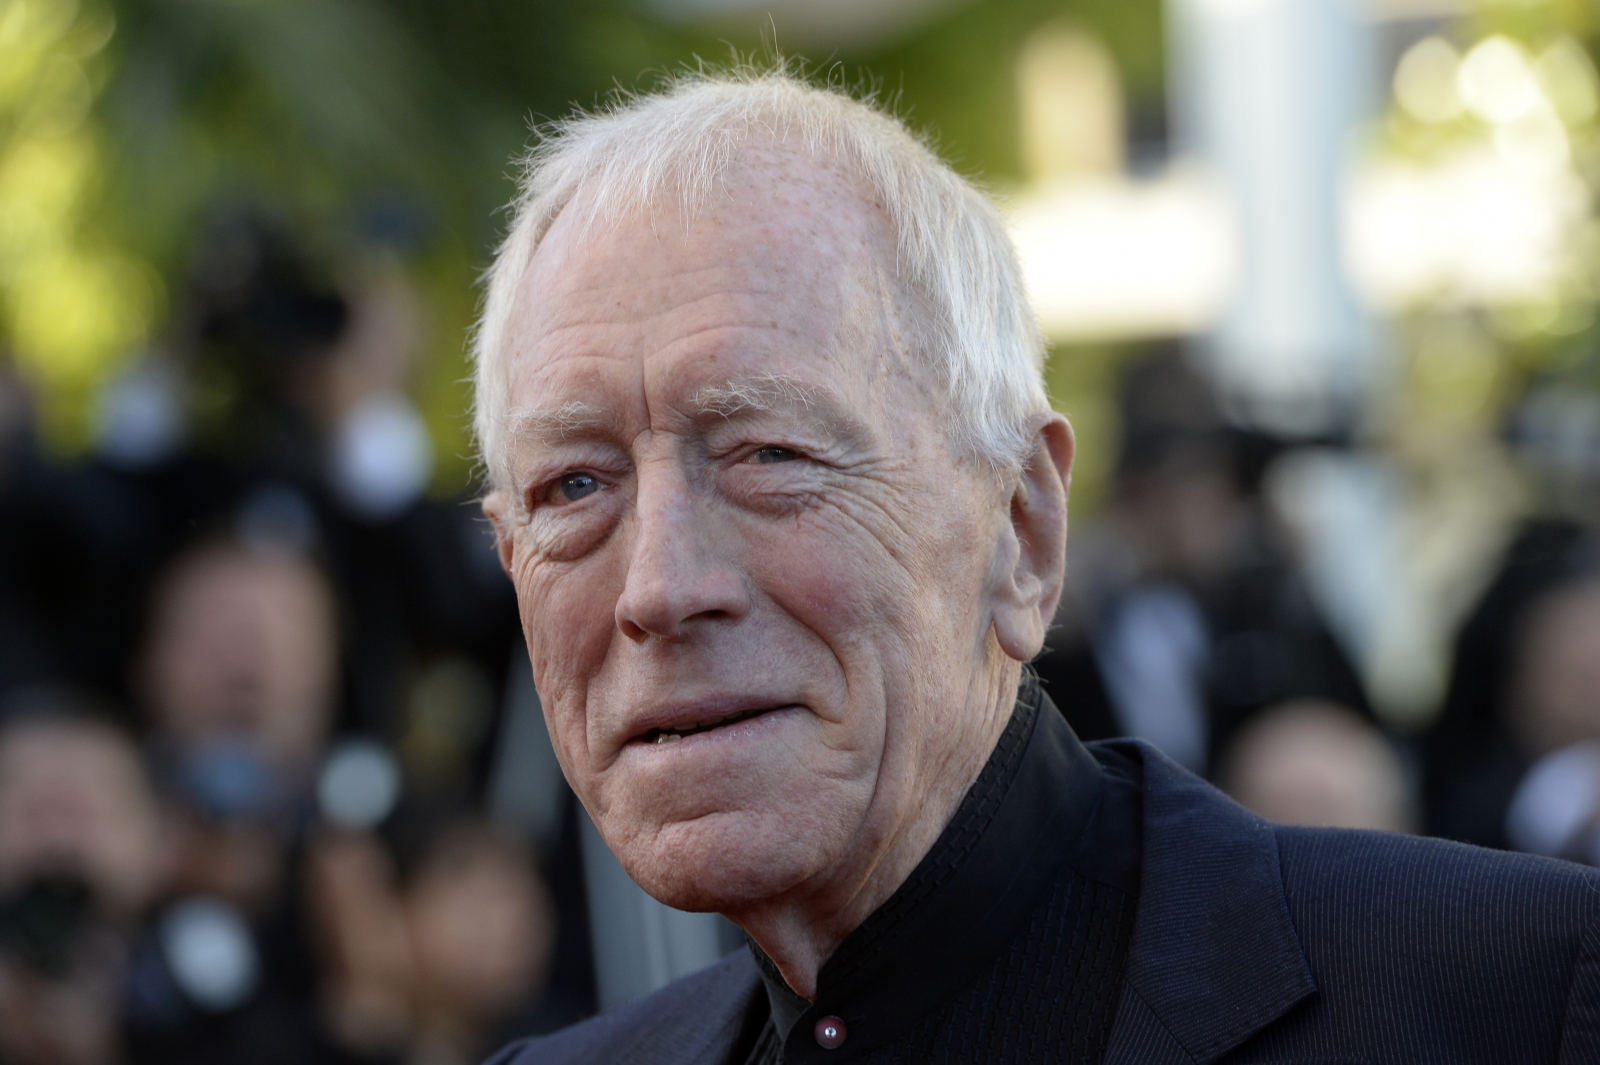 Game Of Thrones: The Exorcist's Max von Sydow cast as 